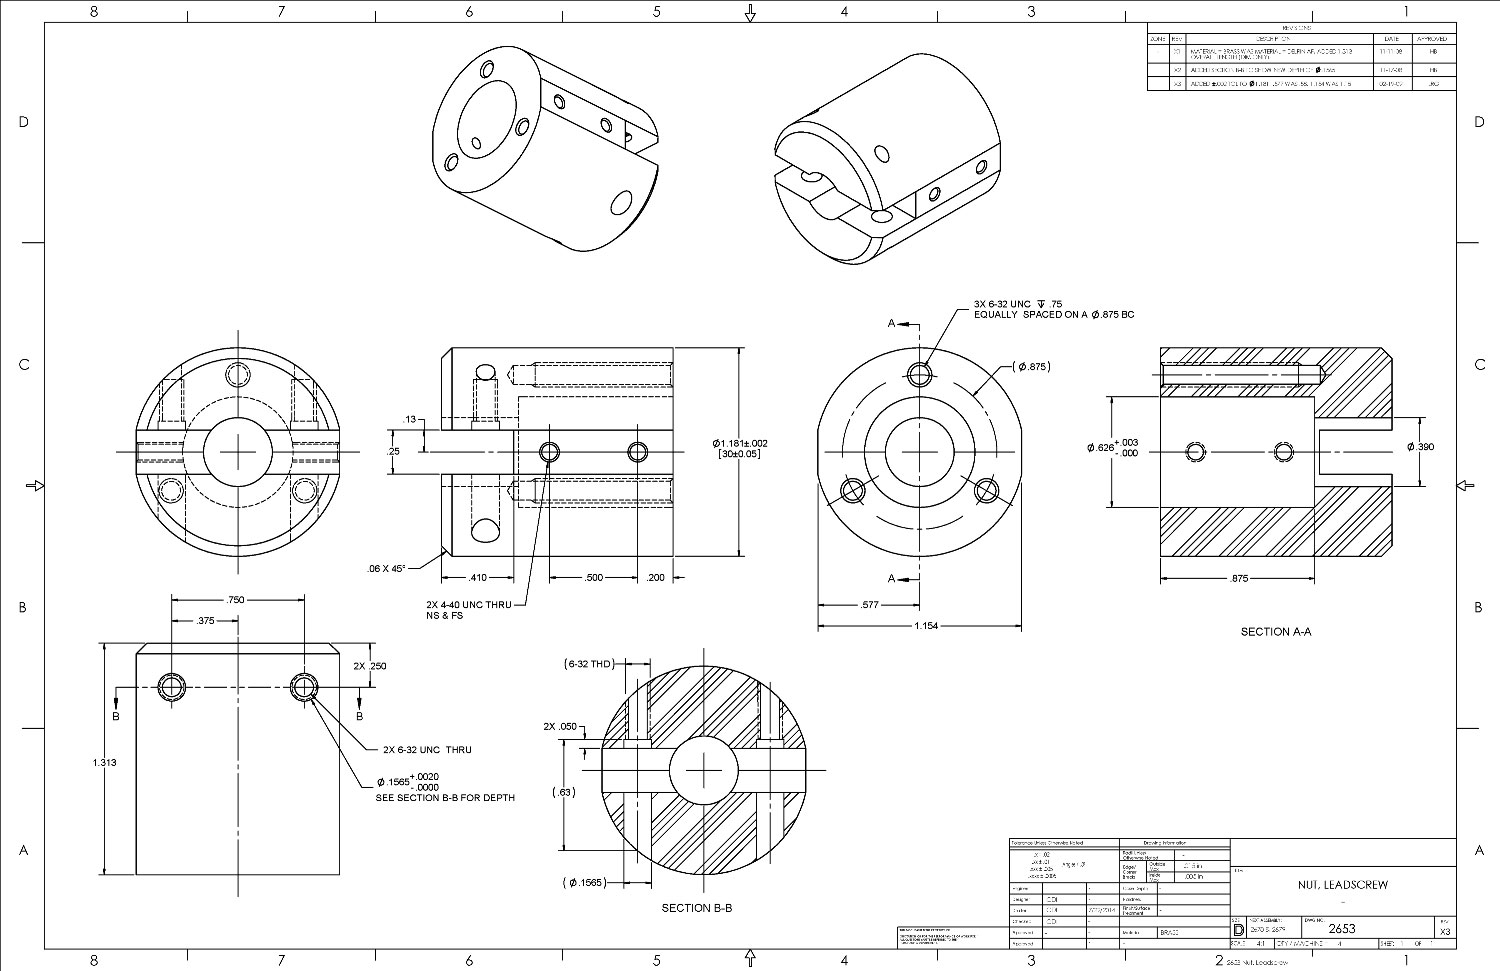 Solidworks Engineering Drawing at GetDrawings Free download